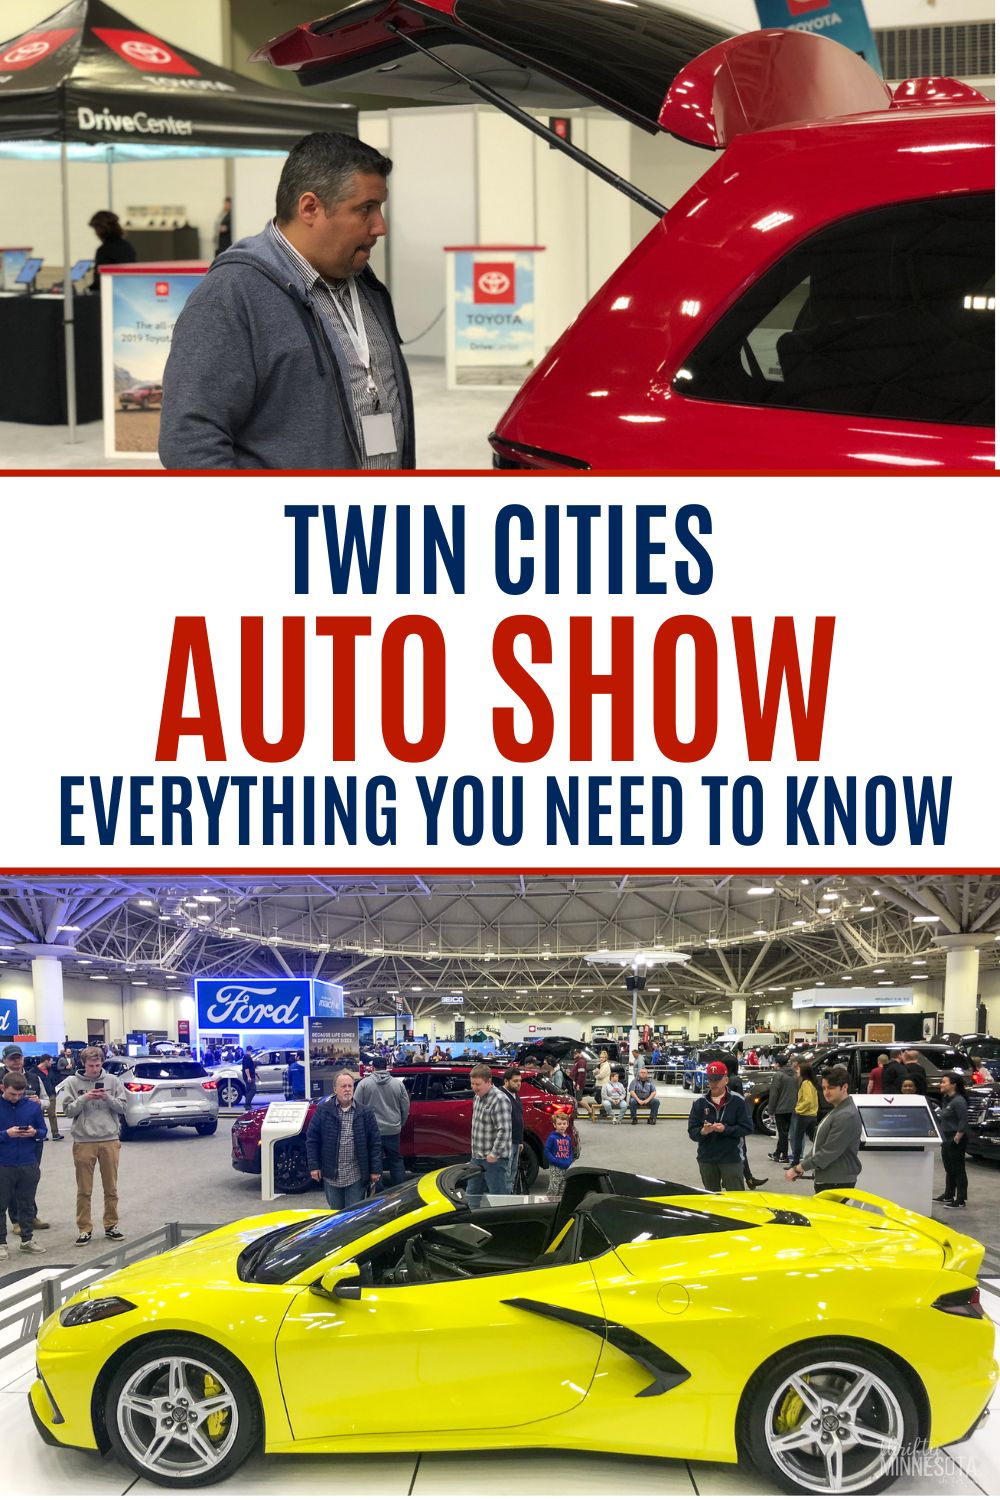 Twin Cities Auto Show.